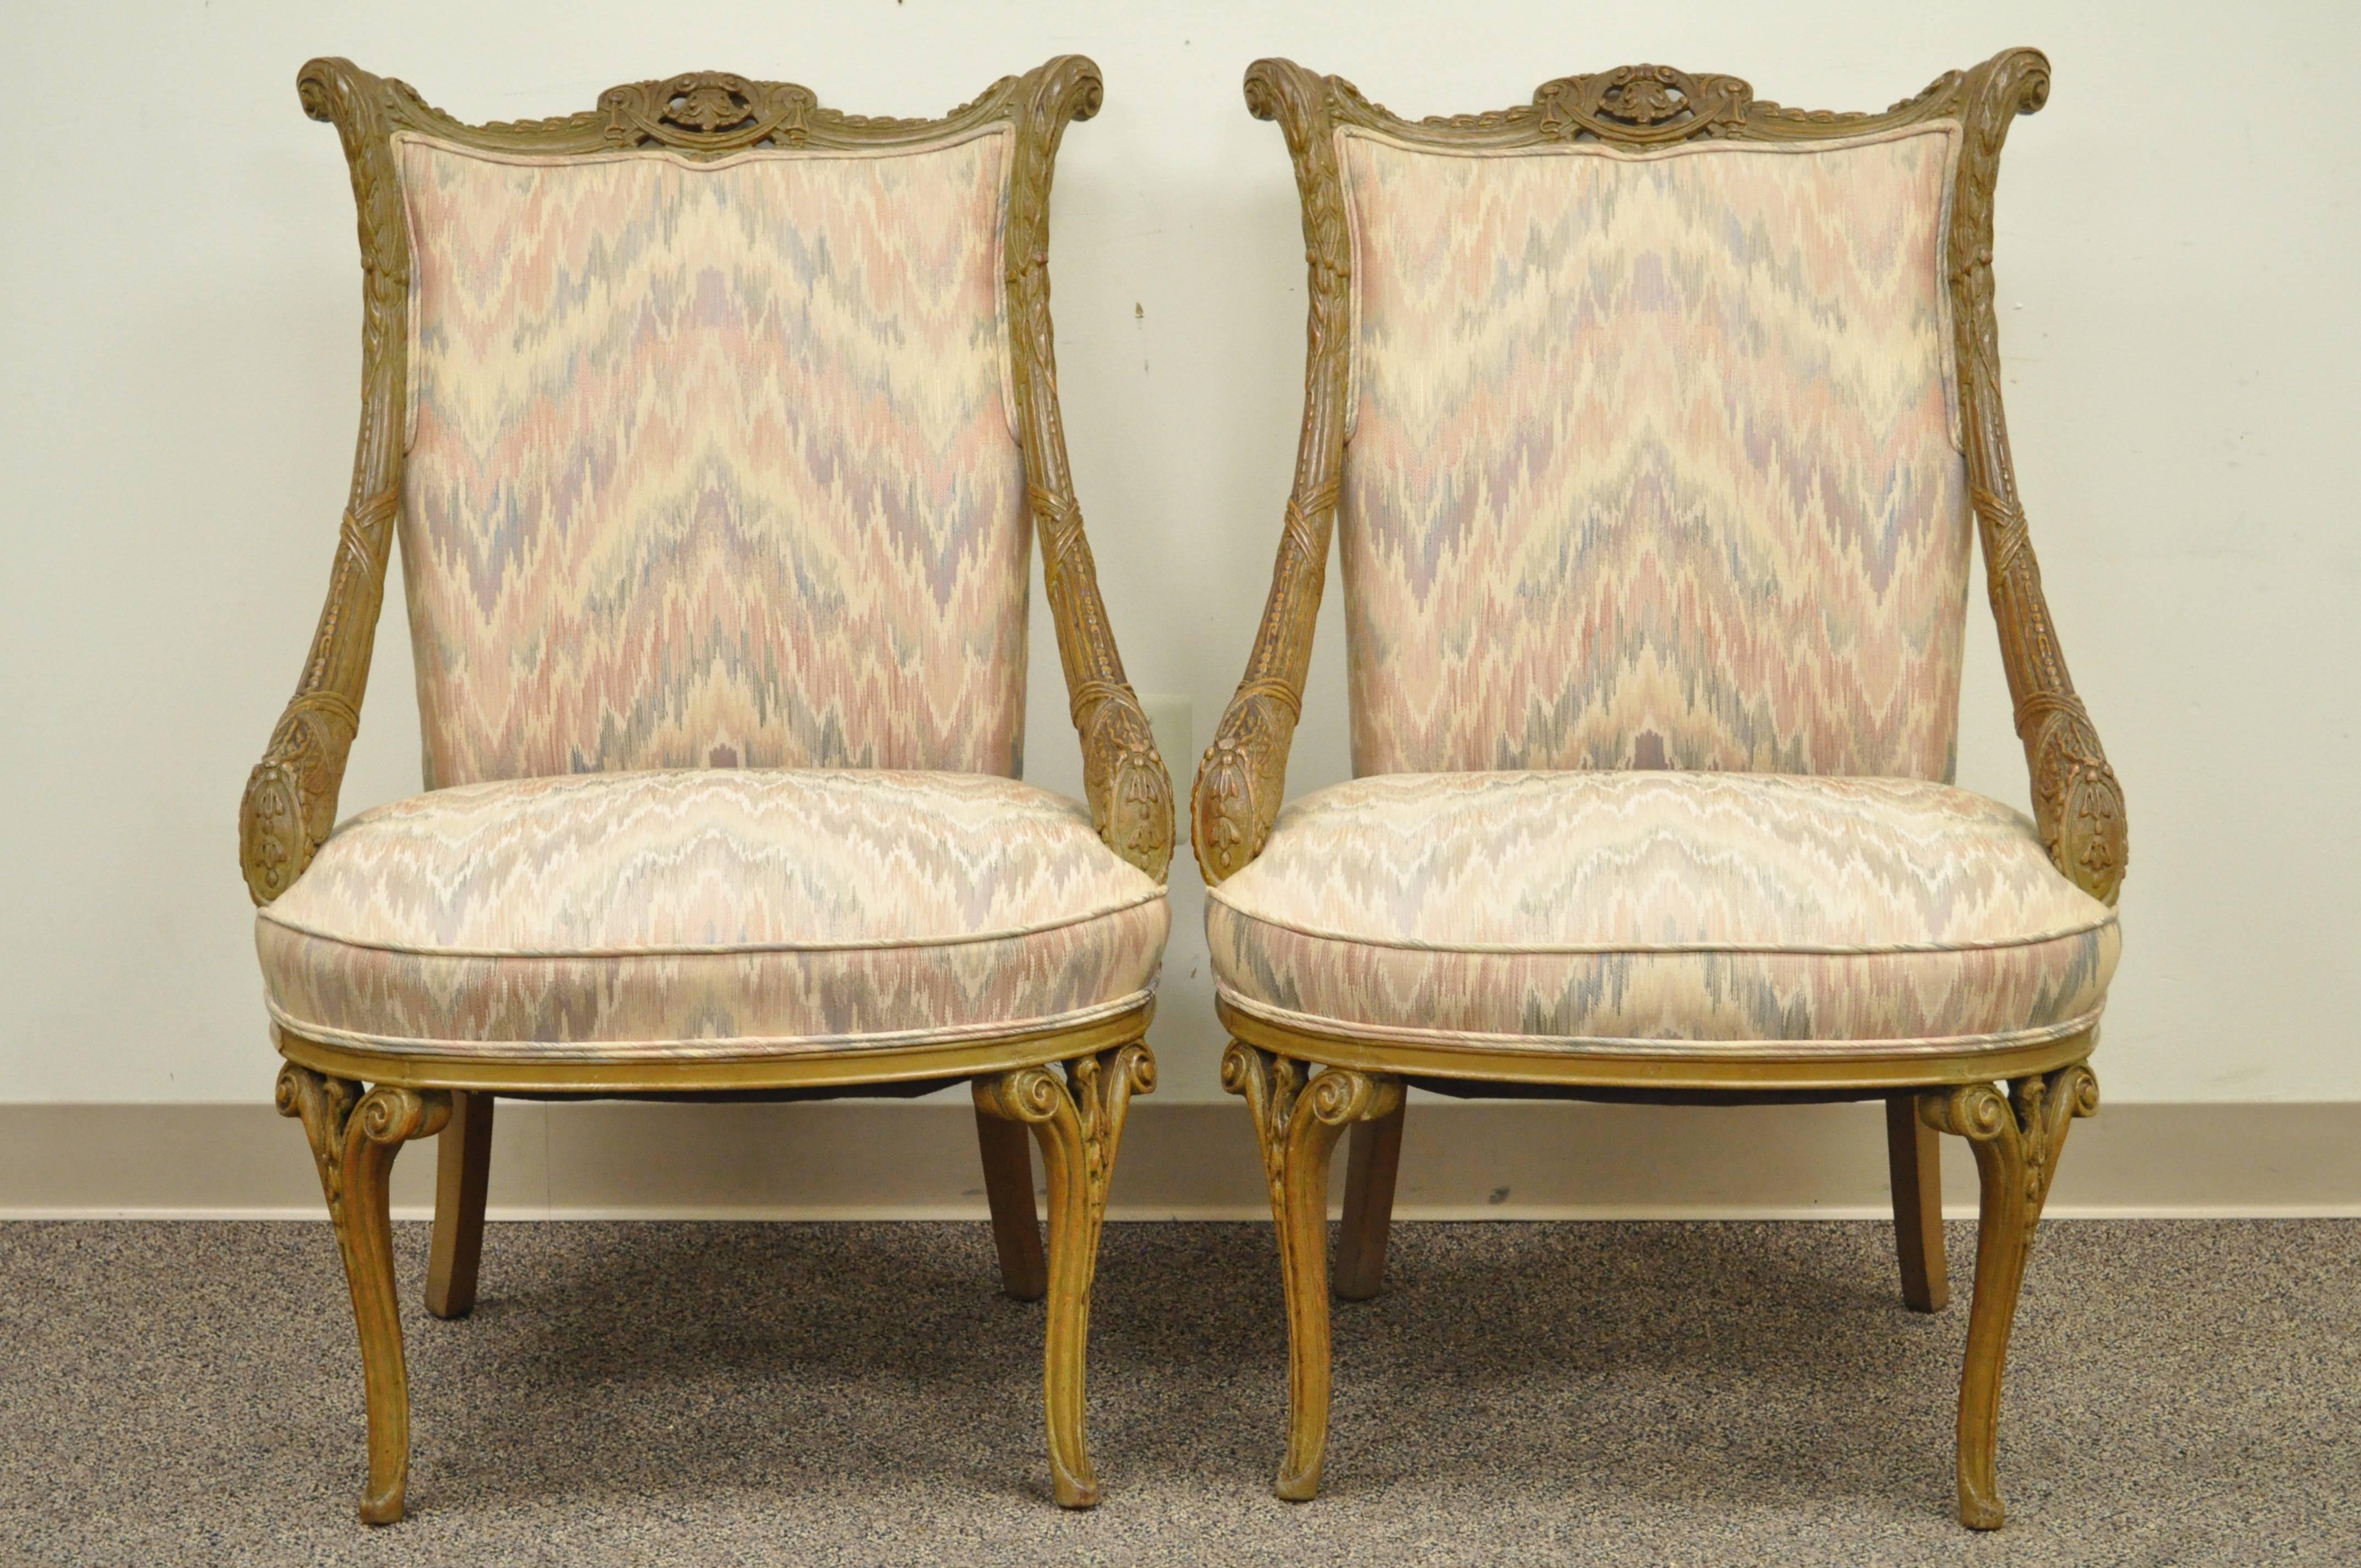 Pair 1940s Hollywood Regency Carved Parlor Chairs Attributed to Grosfeld House For Sale 3